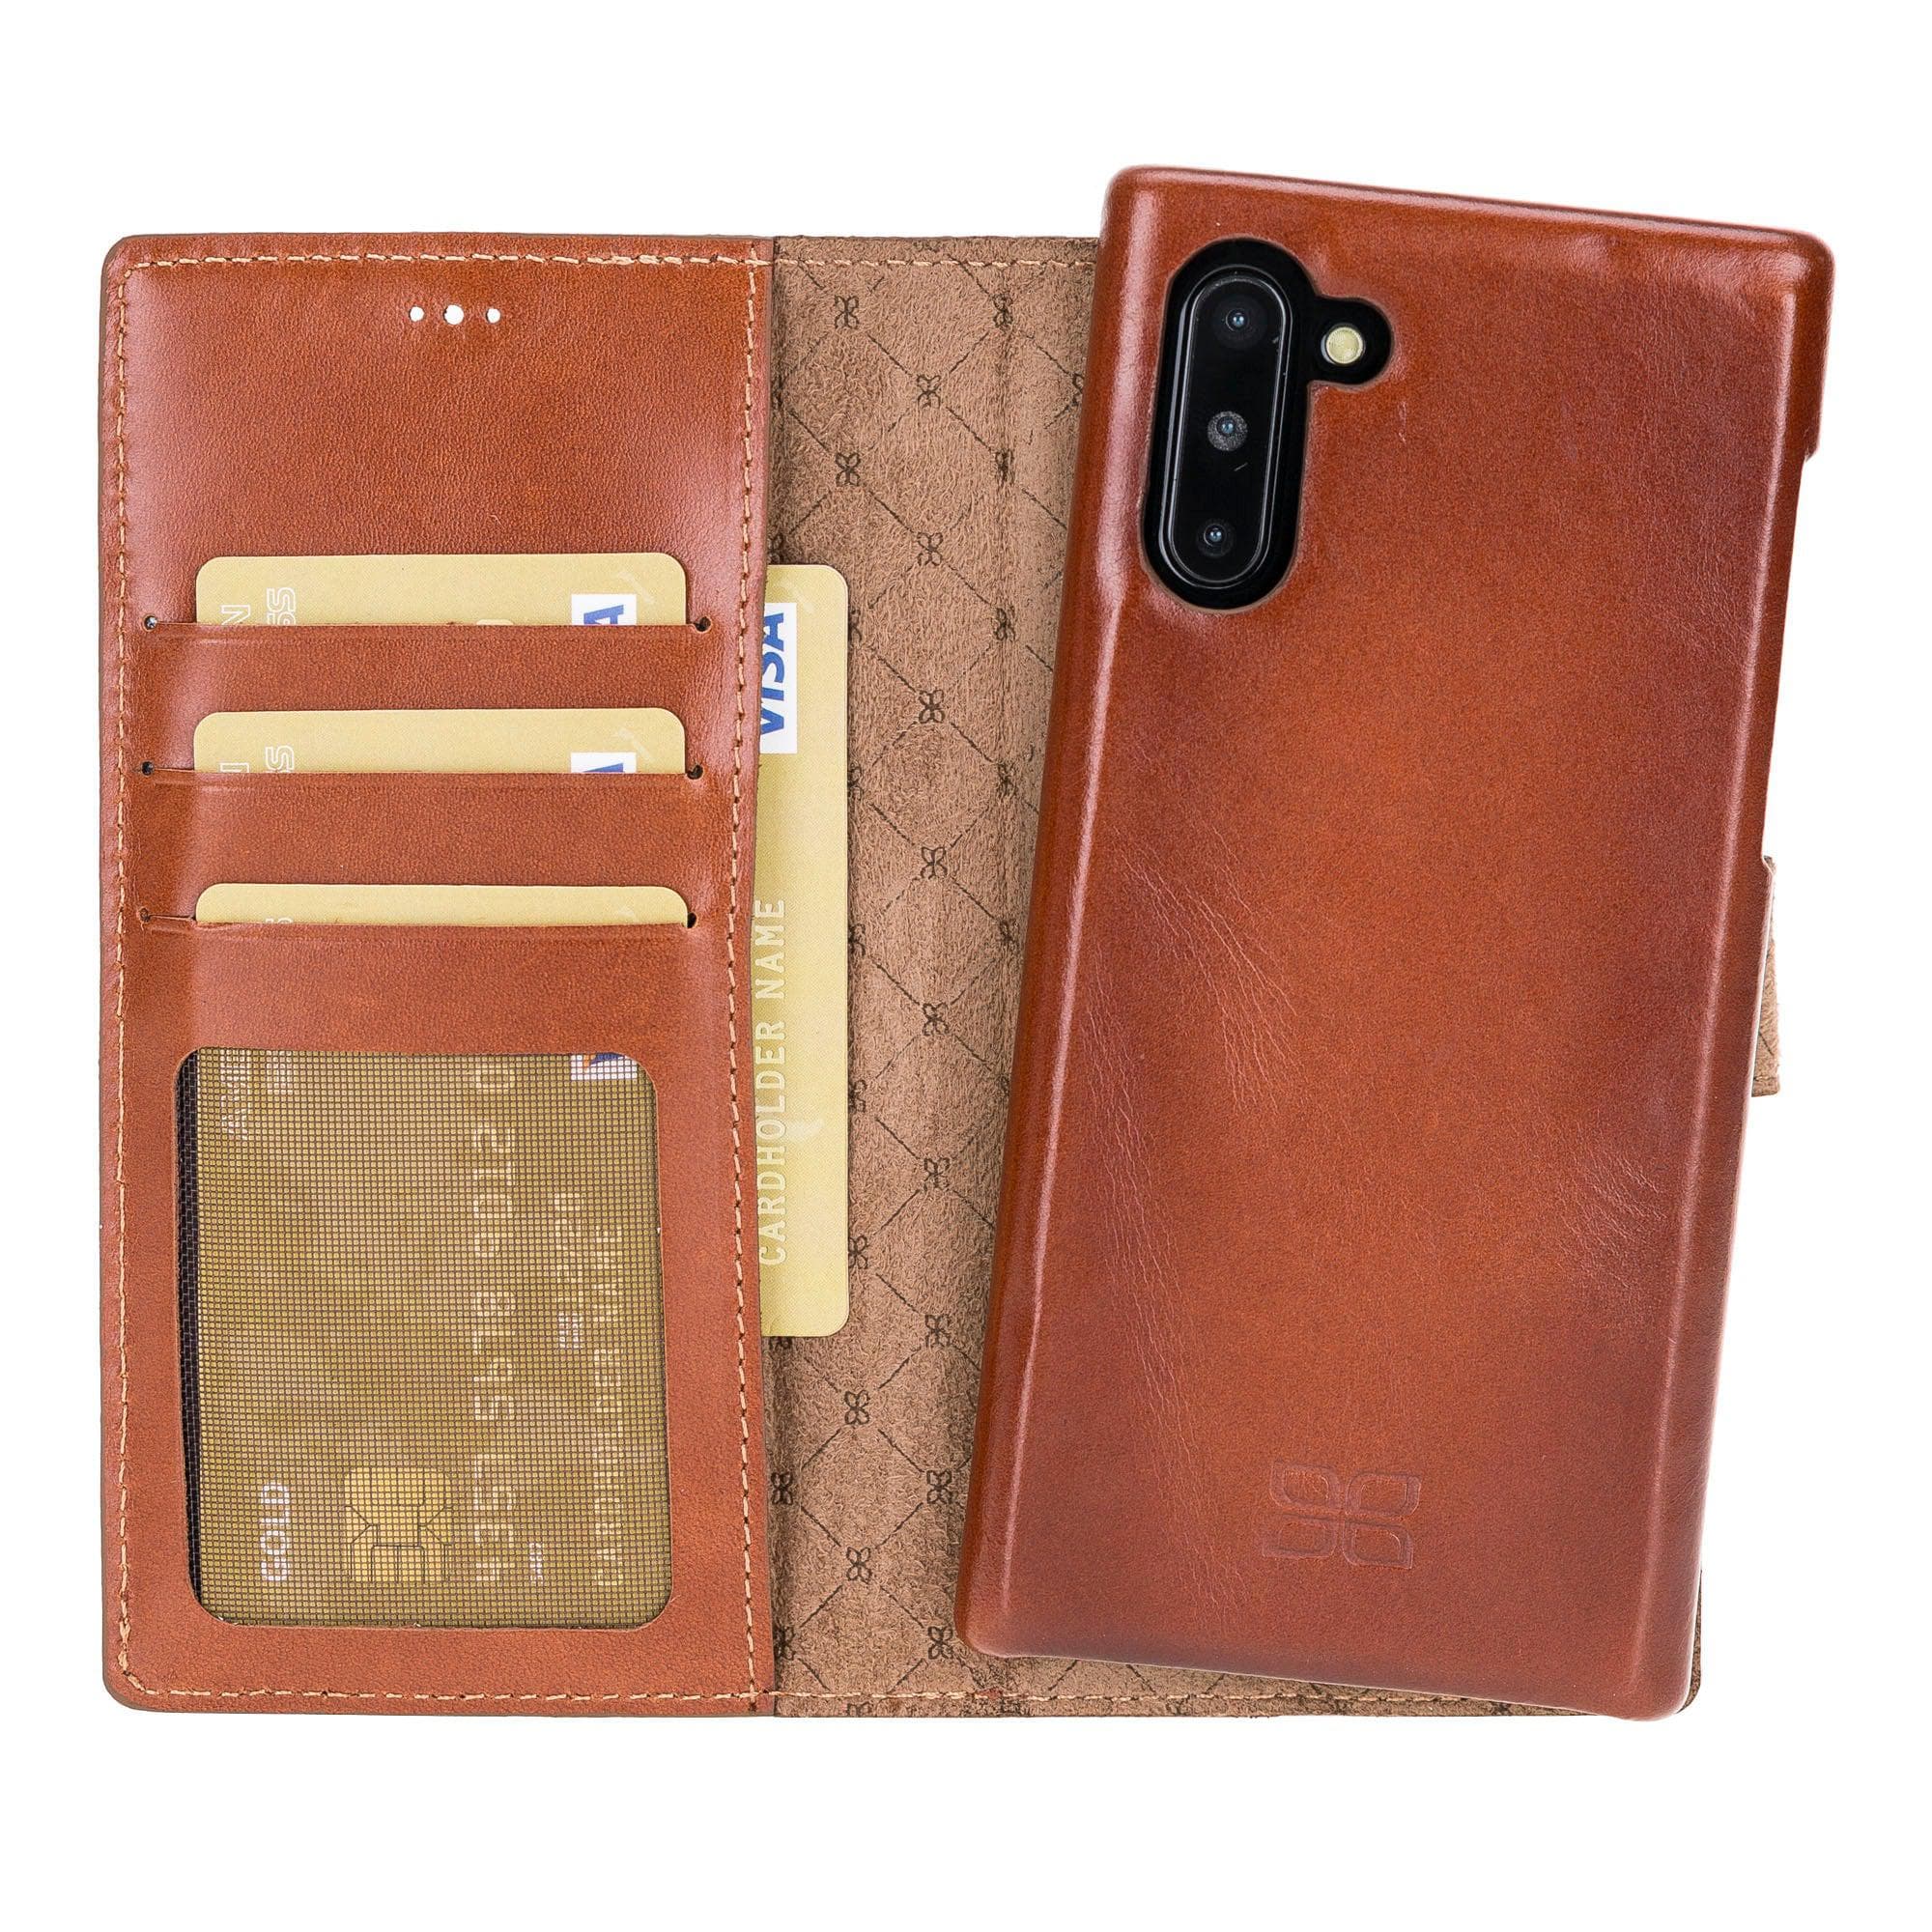 Full Leather Coating Detachable Wallet Case for Samsung Note 10 Series Note 10 / Tan / Leather Bouletta LTD